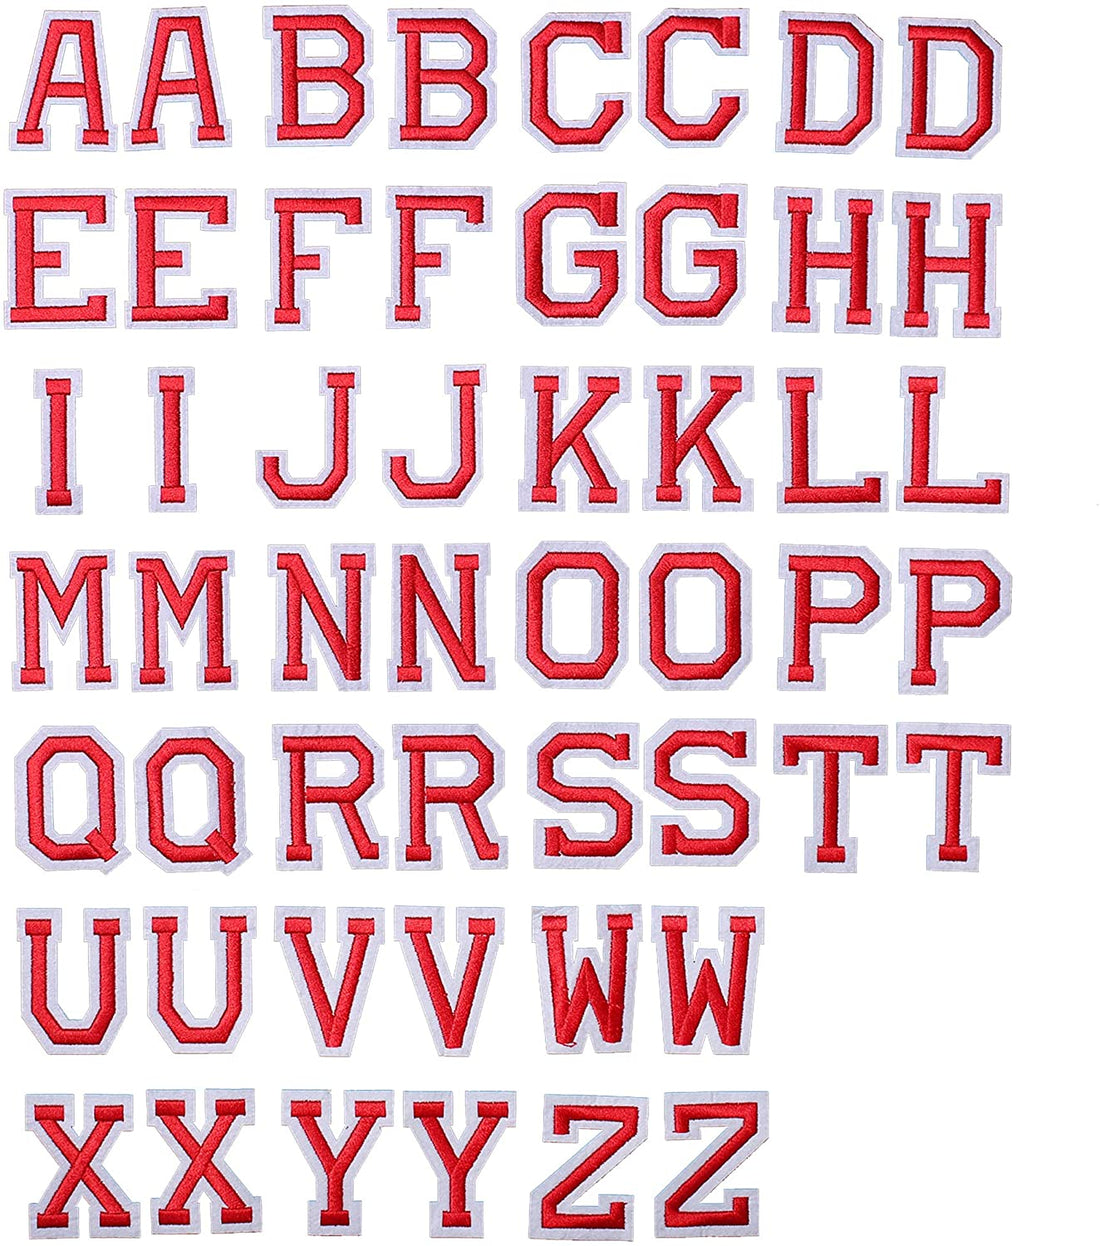 Alphabet A to Z Patches, Iron on Sew on Letters for Clothing, Hats